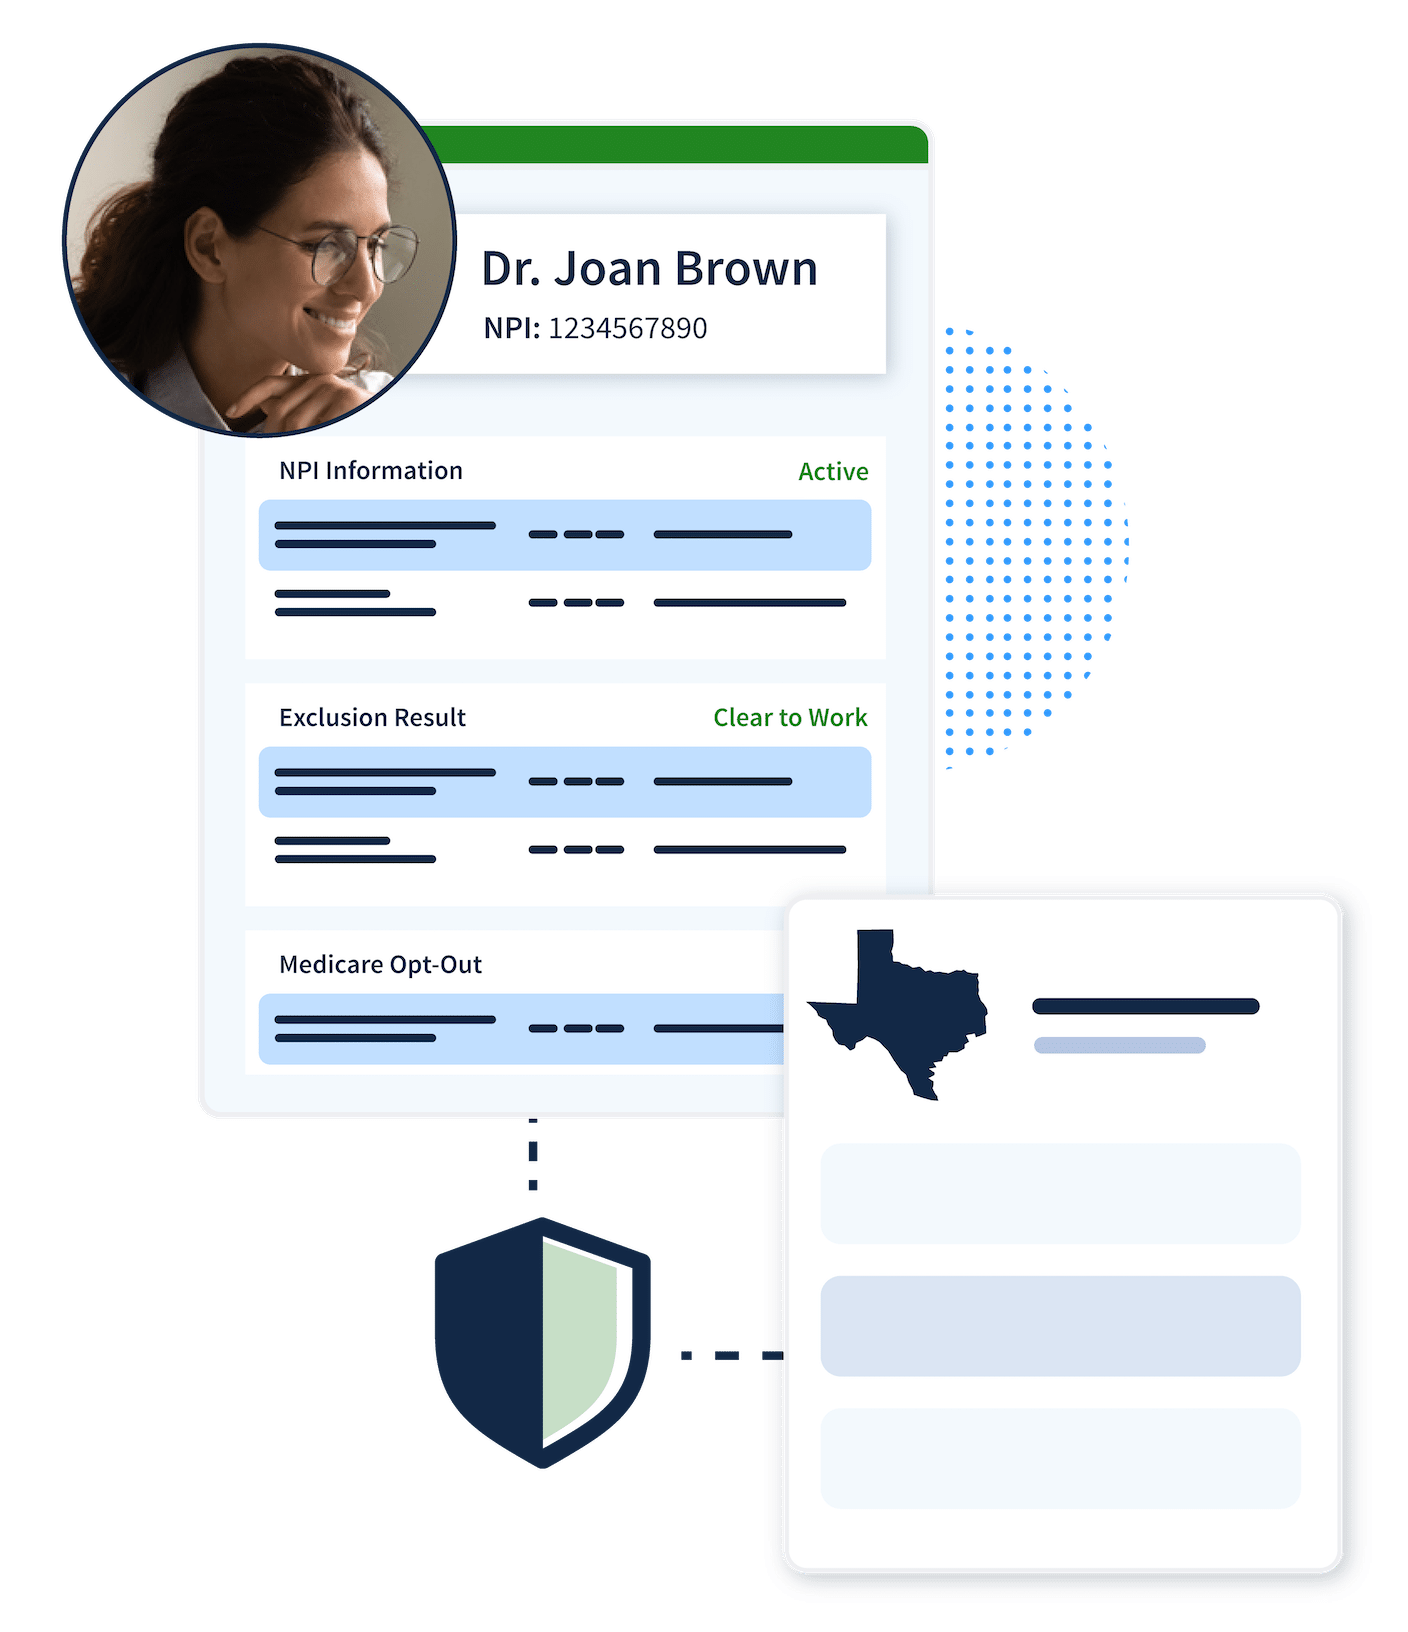 Woman's provider profile depicting her status as clear, double-checked against state records from Texas